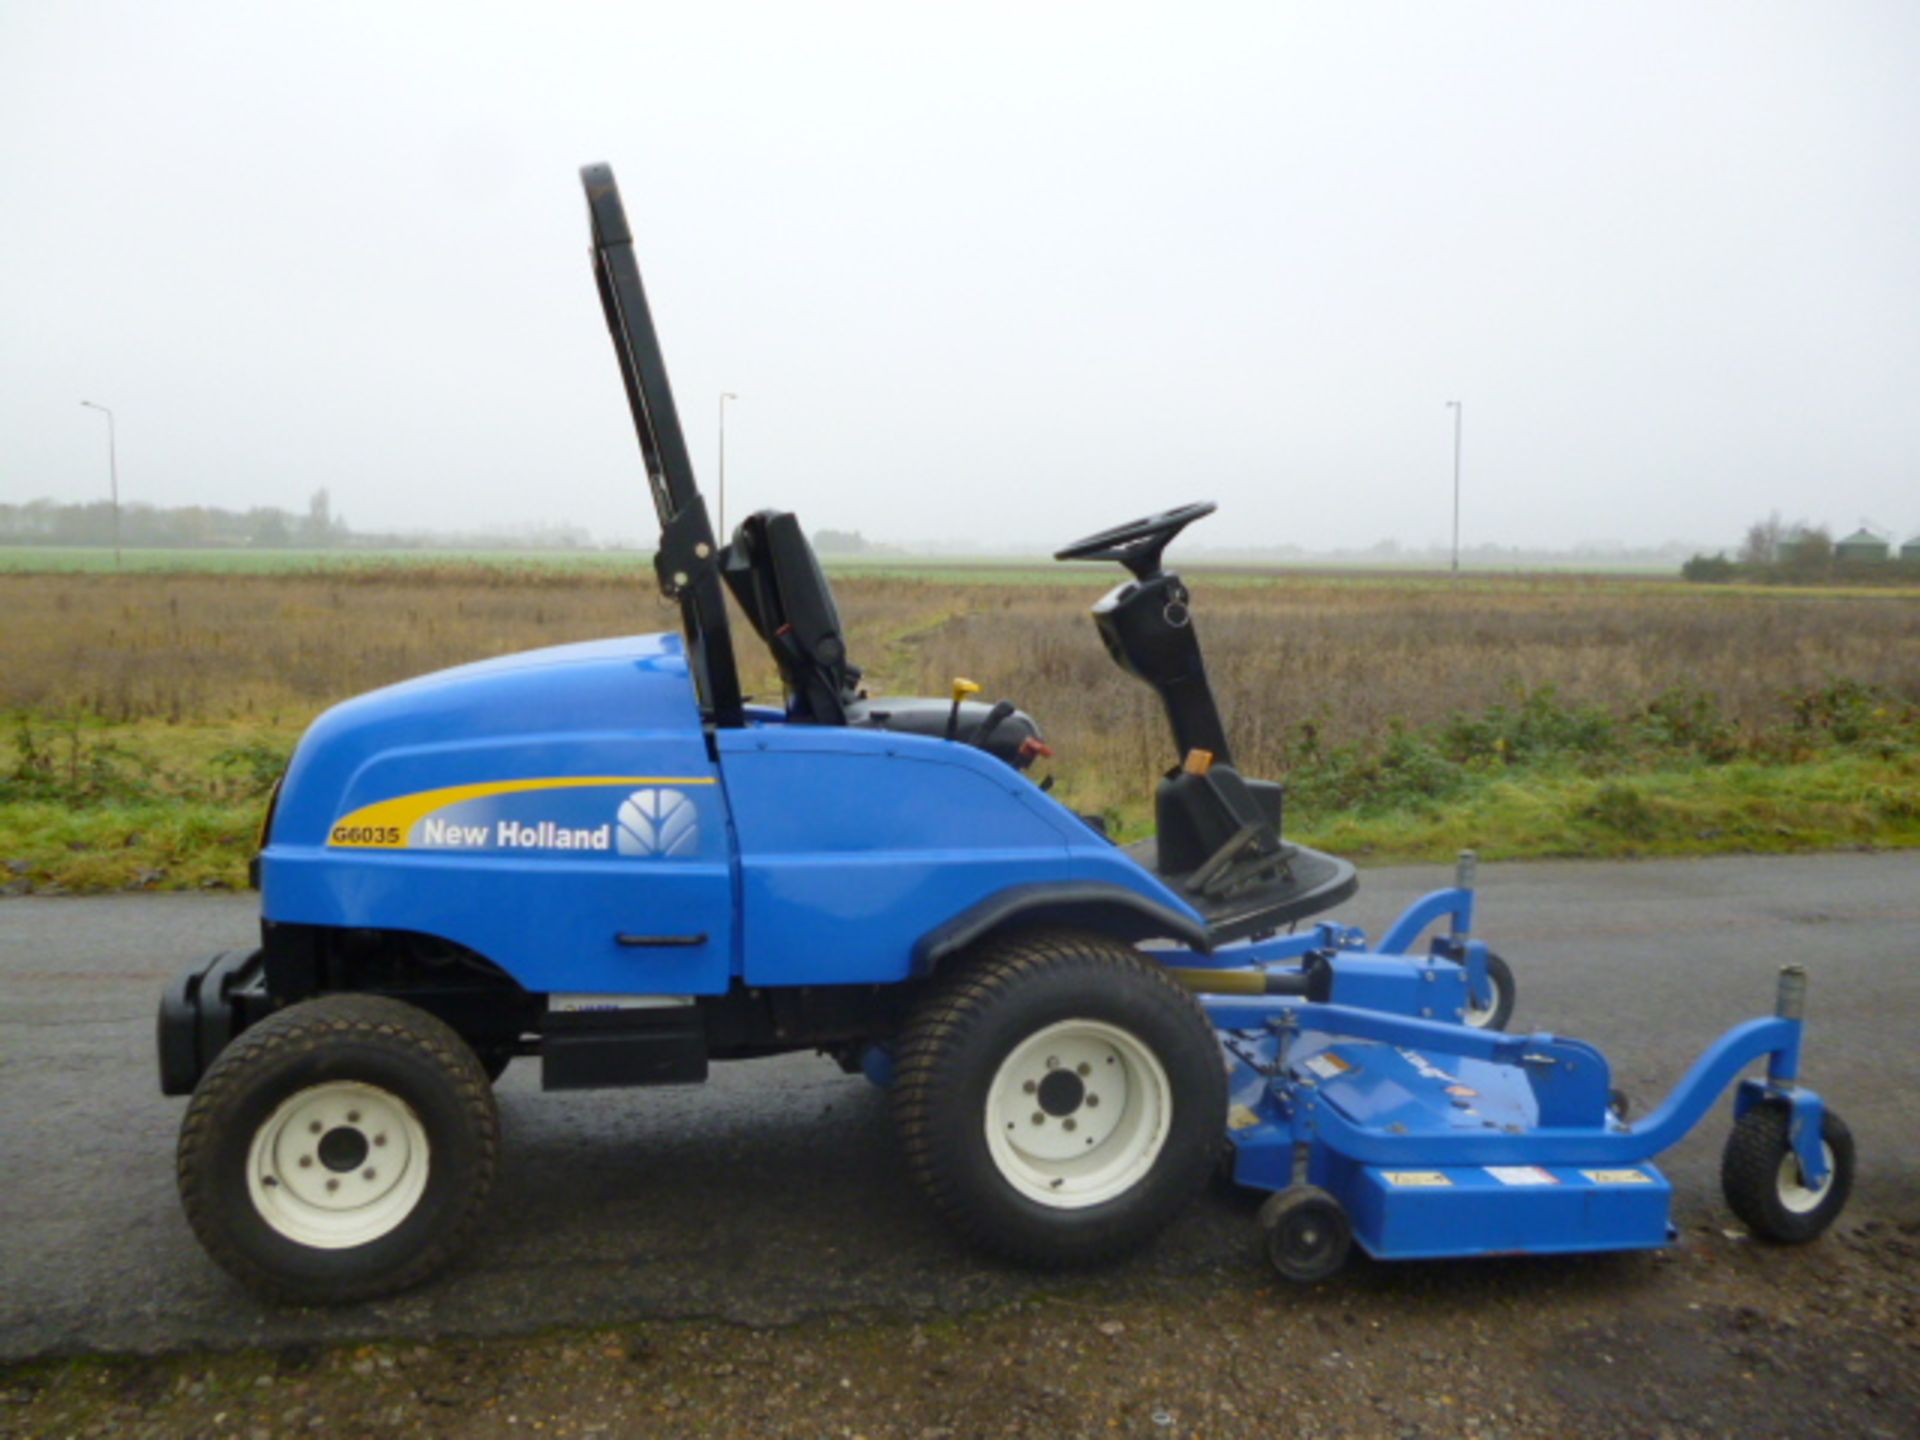 NEW HOLLAND G6035 OUTFRONT RIDE ON MOWER - Image 5 of 5